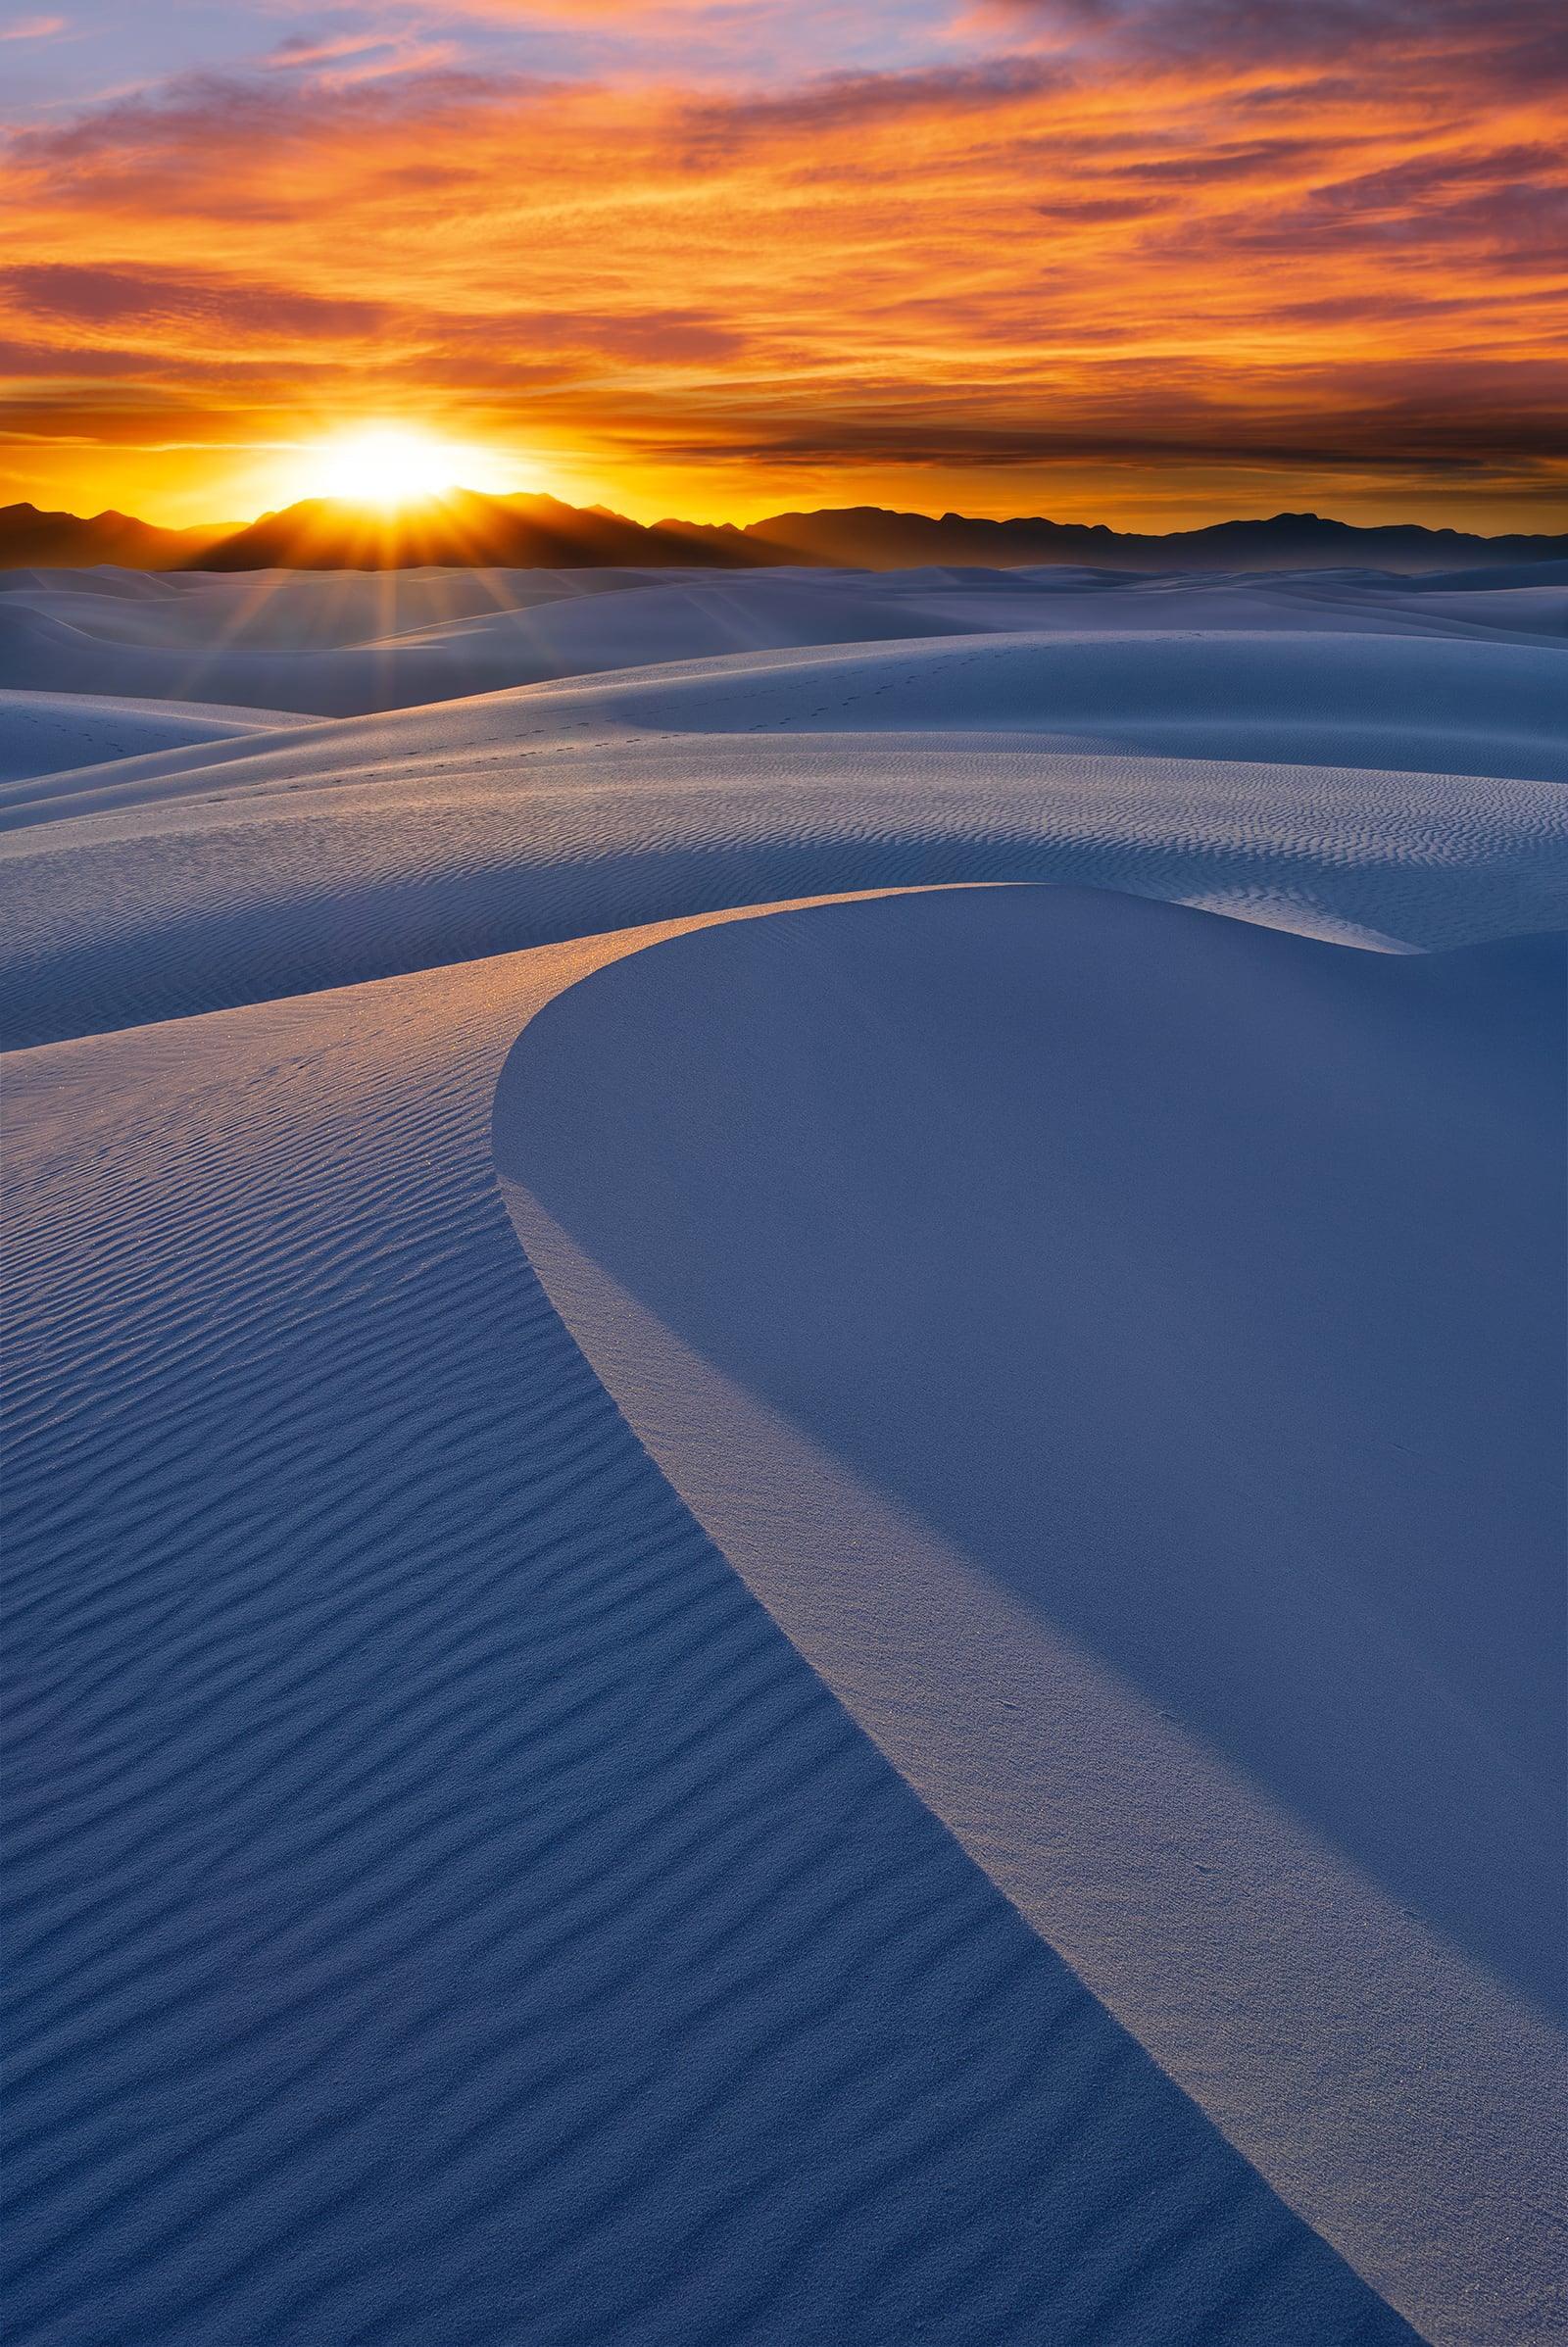 Sun setting behind the hills and windswept sand dunes at White Sands National Monument New Mexico